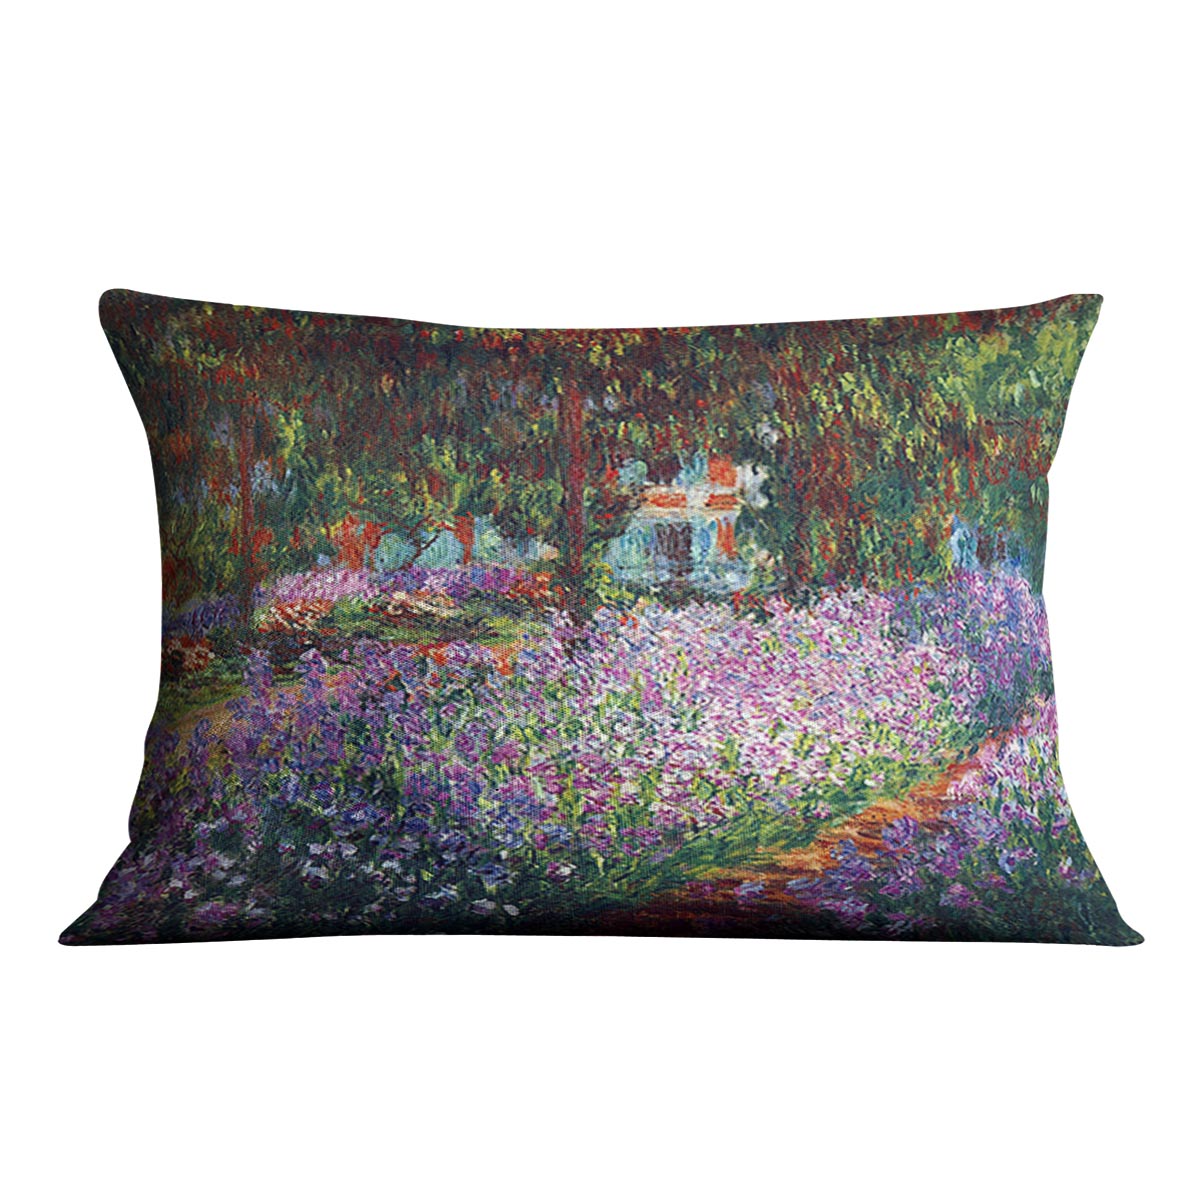 Monet's garden in Giverny by Monet Cushion